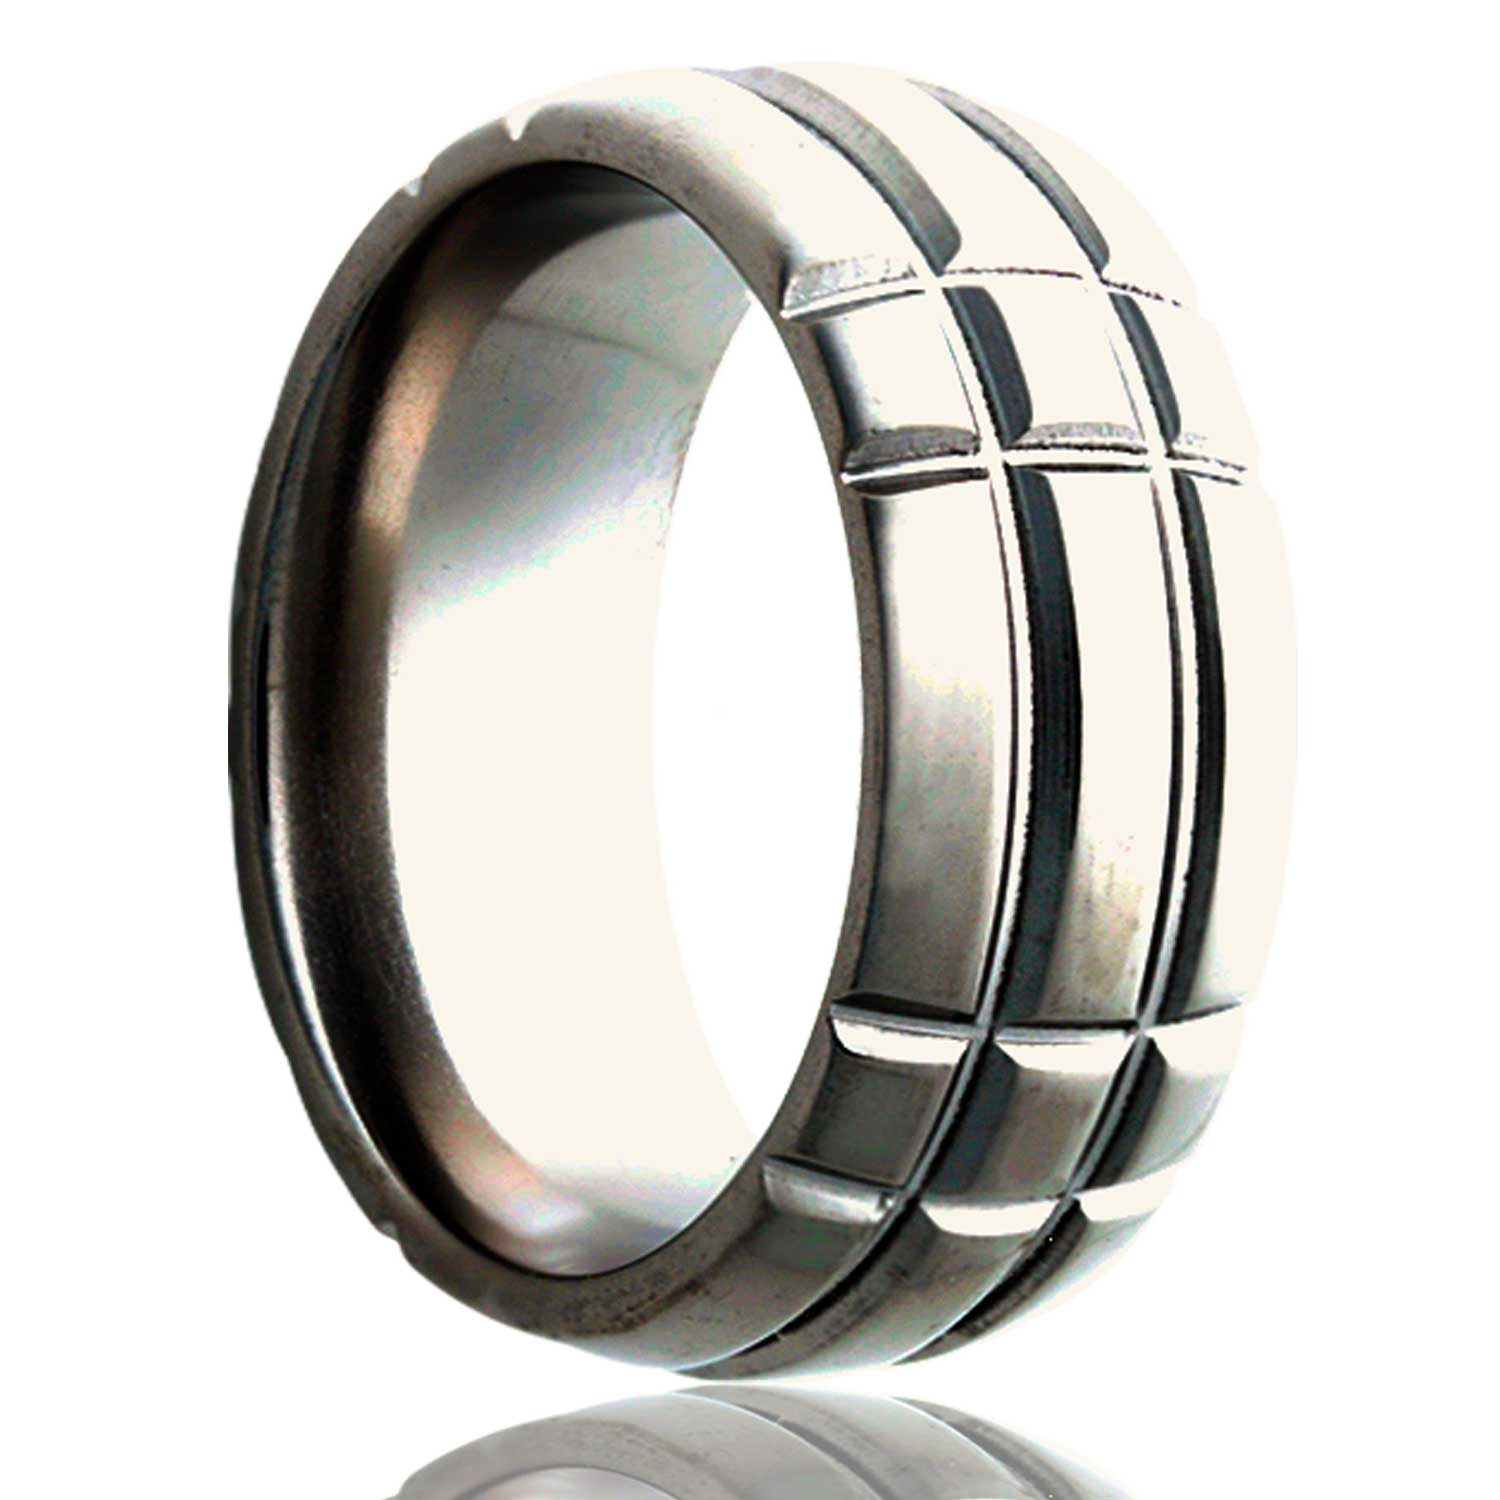 A intersecting grooves domed cobalt wedding band displayed on a neutral white background.